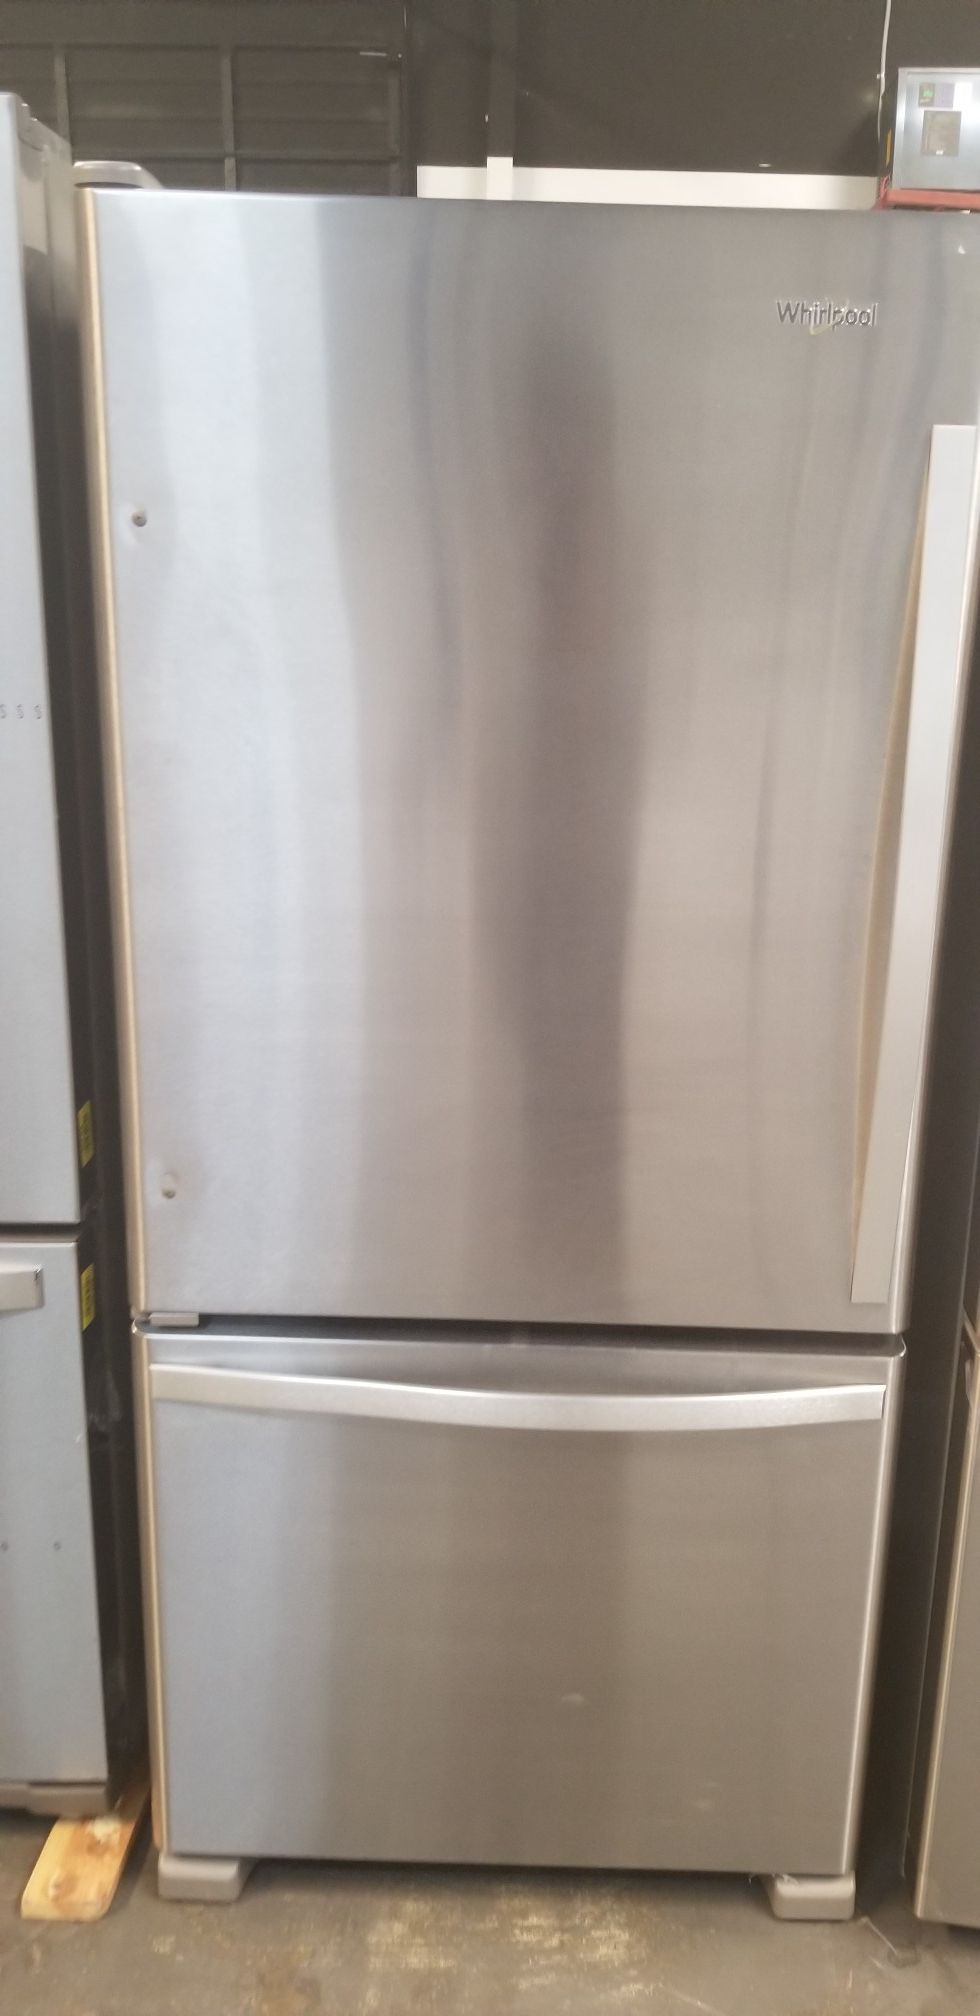 Refrigerator Stainless Bottom Freezer Whirlpool 30"W $39 Down Payment Only